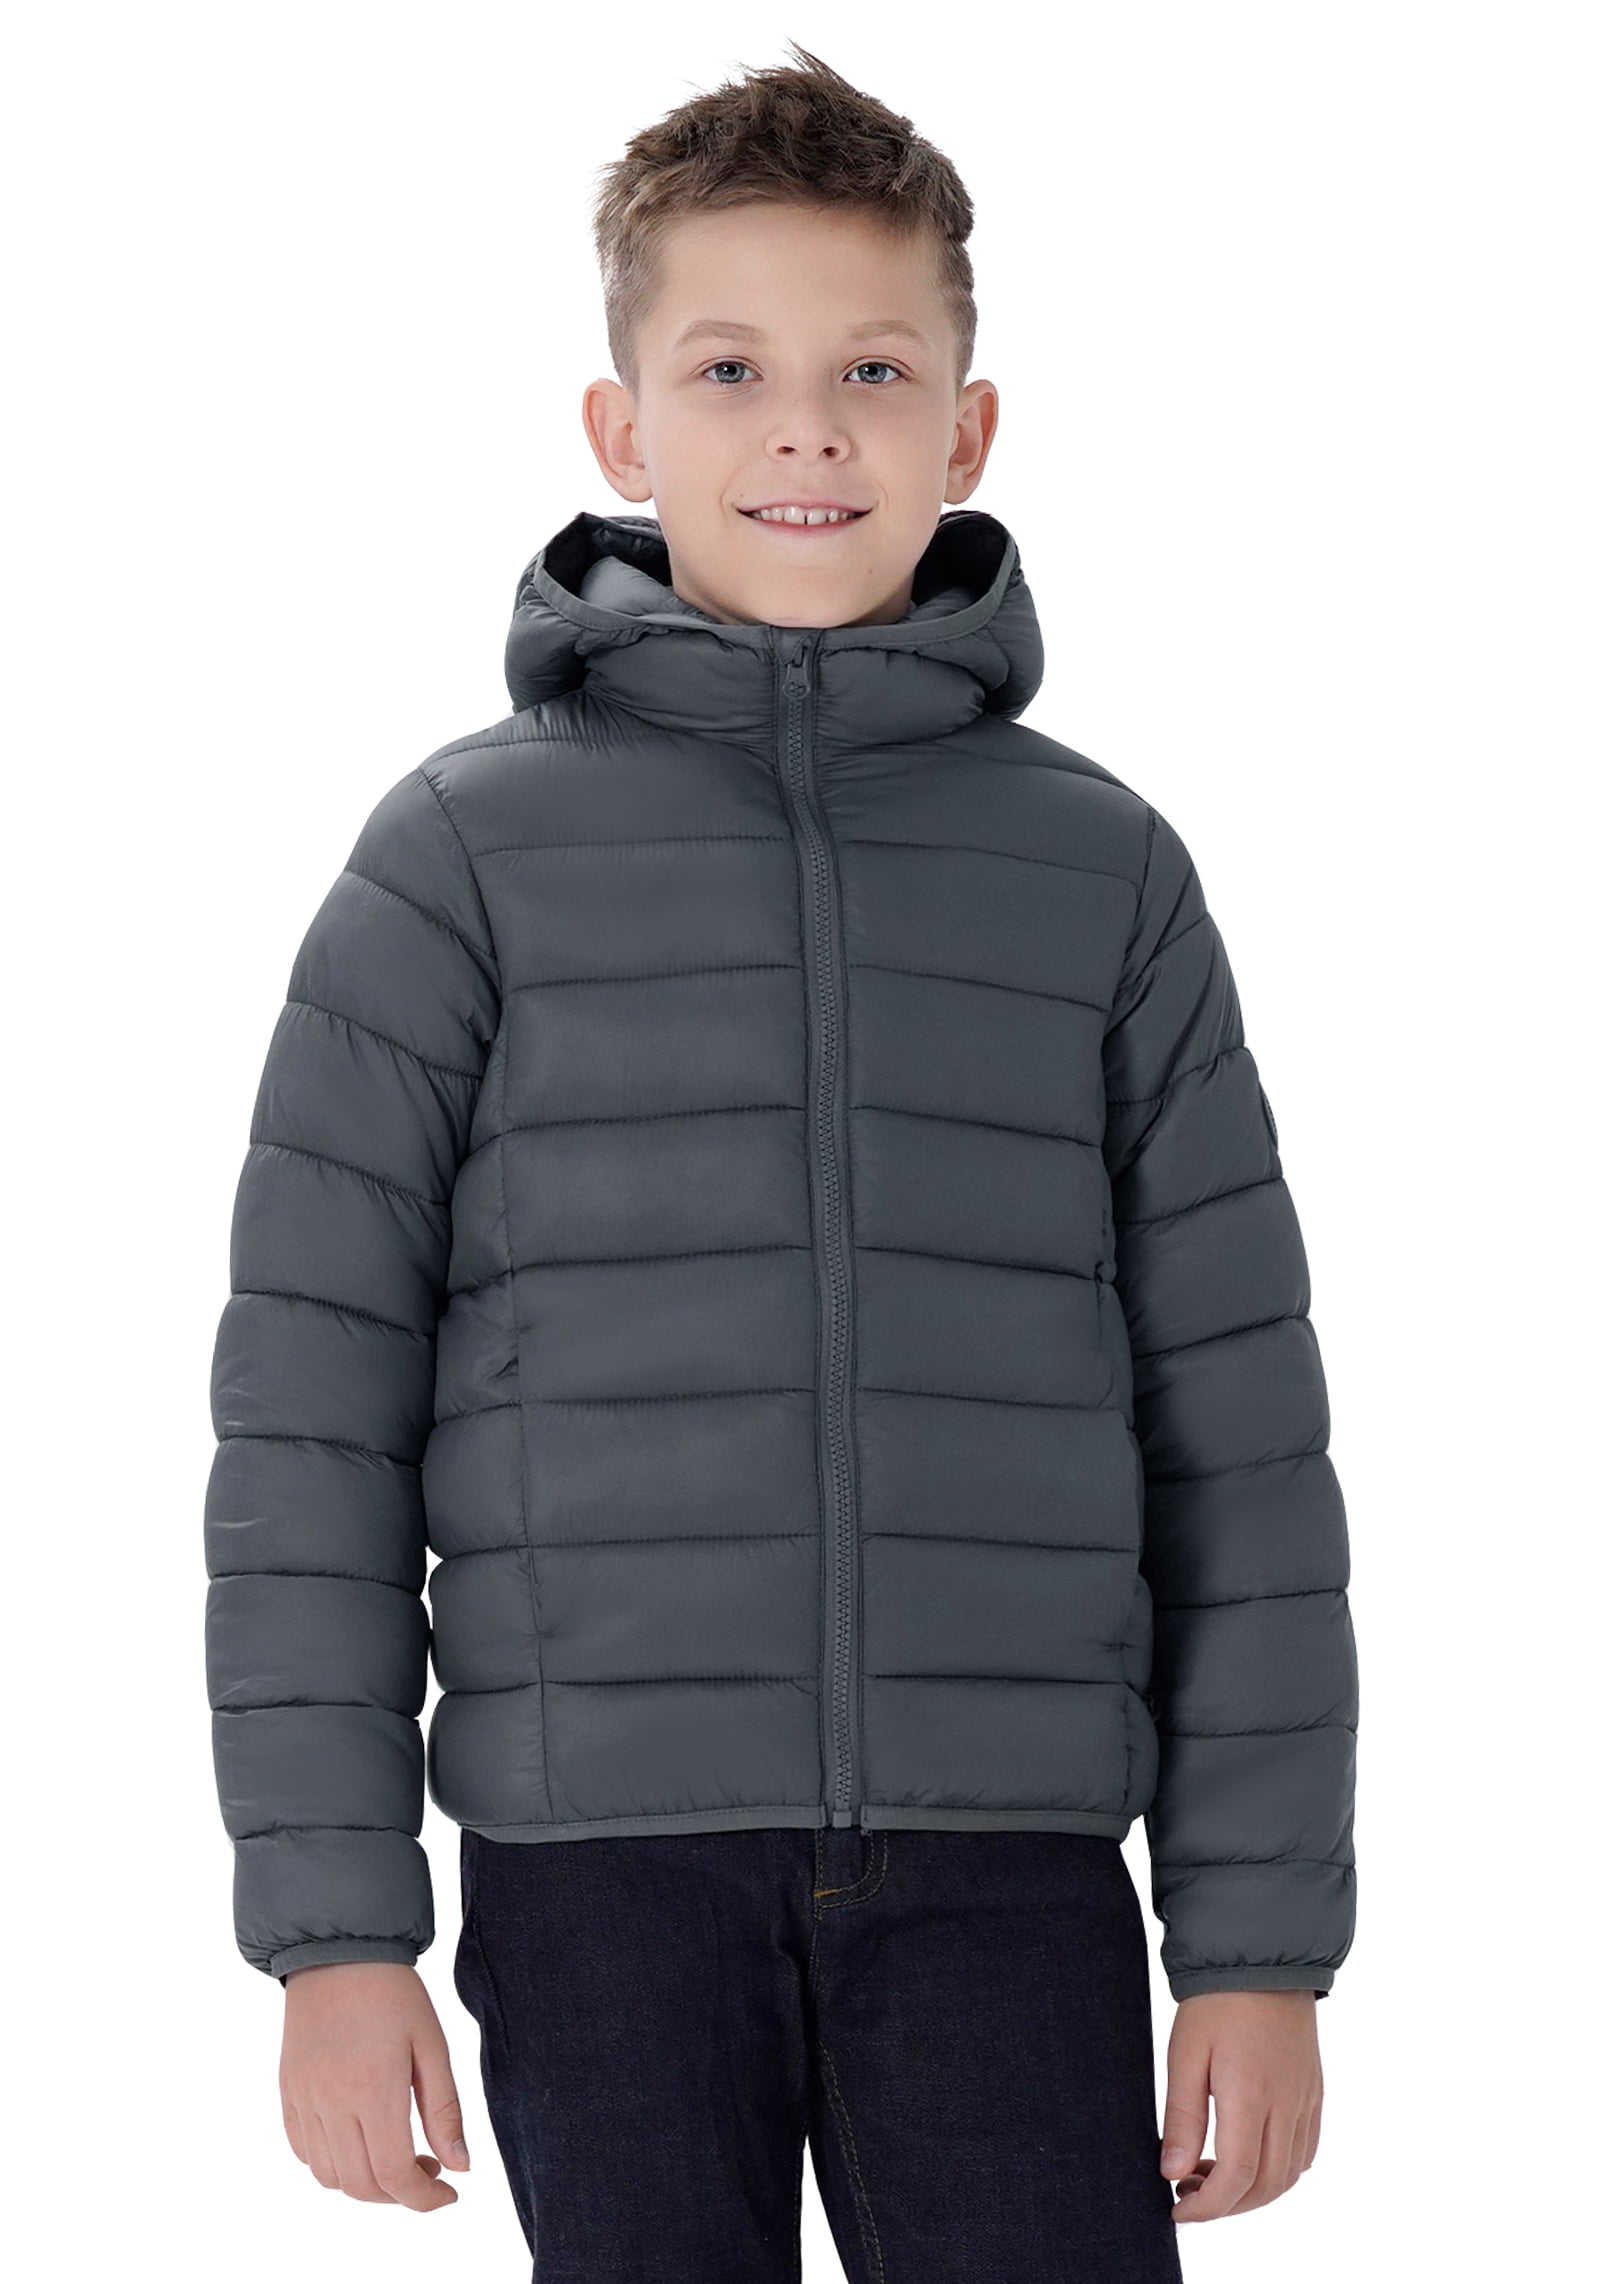 SOLOCOTE Heavyweight Winter Coats for Boys Warm Thick Hooded Sherpa Lined Jacket Water Resistant Windbreaker 